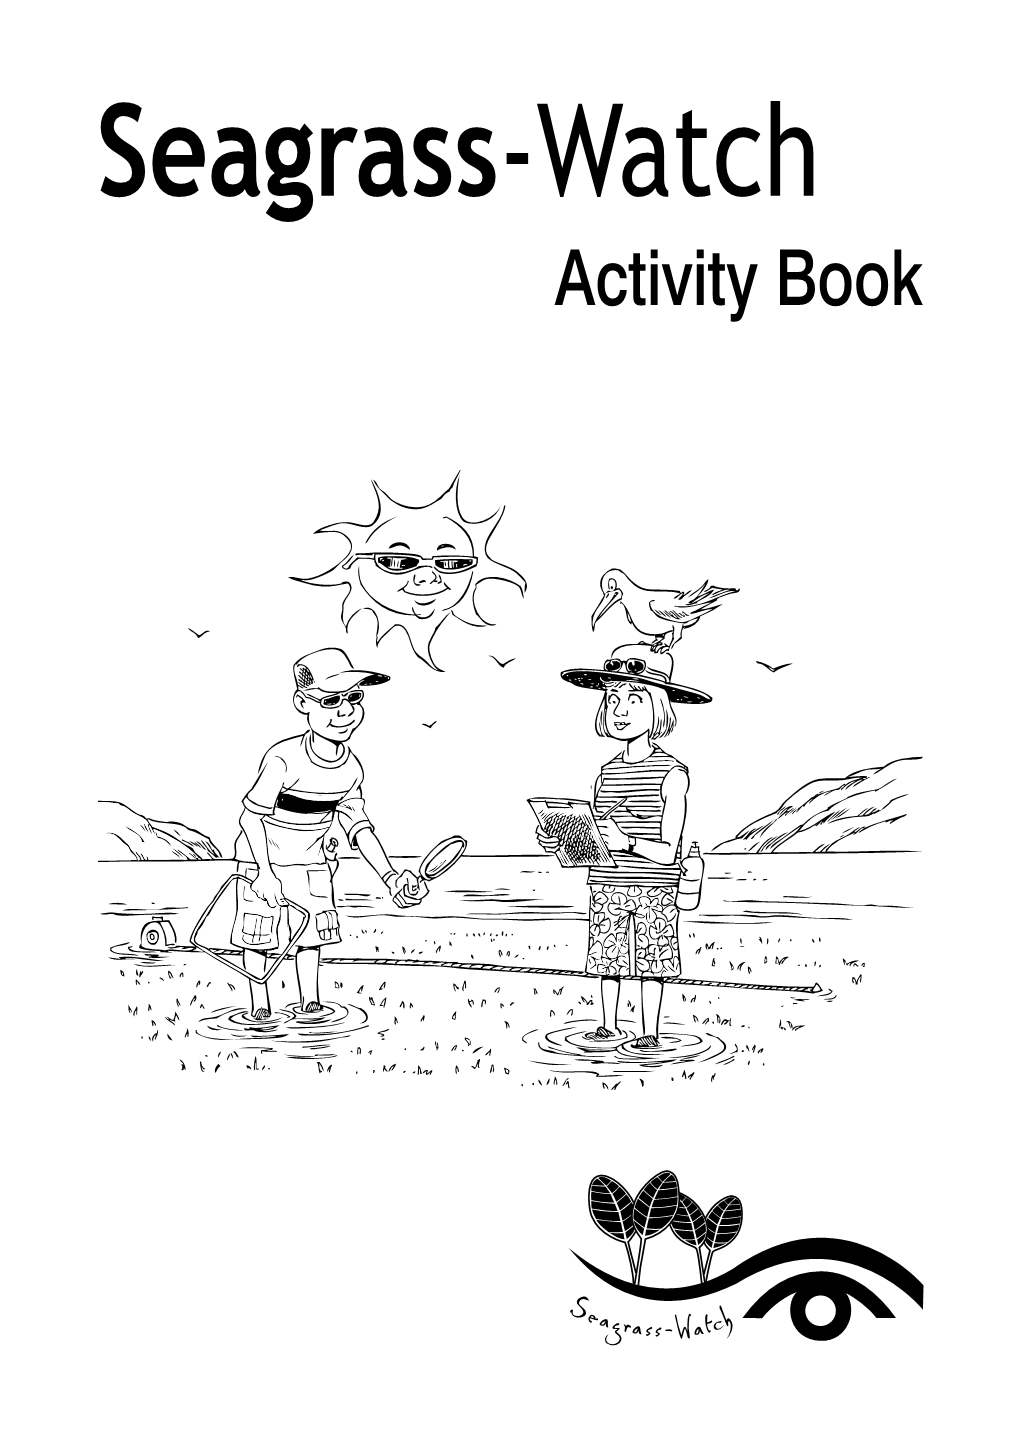 Activity Book Sensational Seagrass Seagrass Is One of the Most Important Plants on Earth